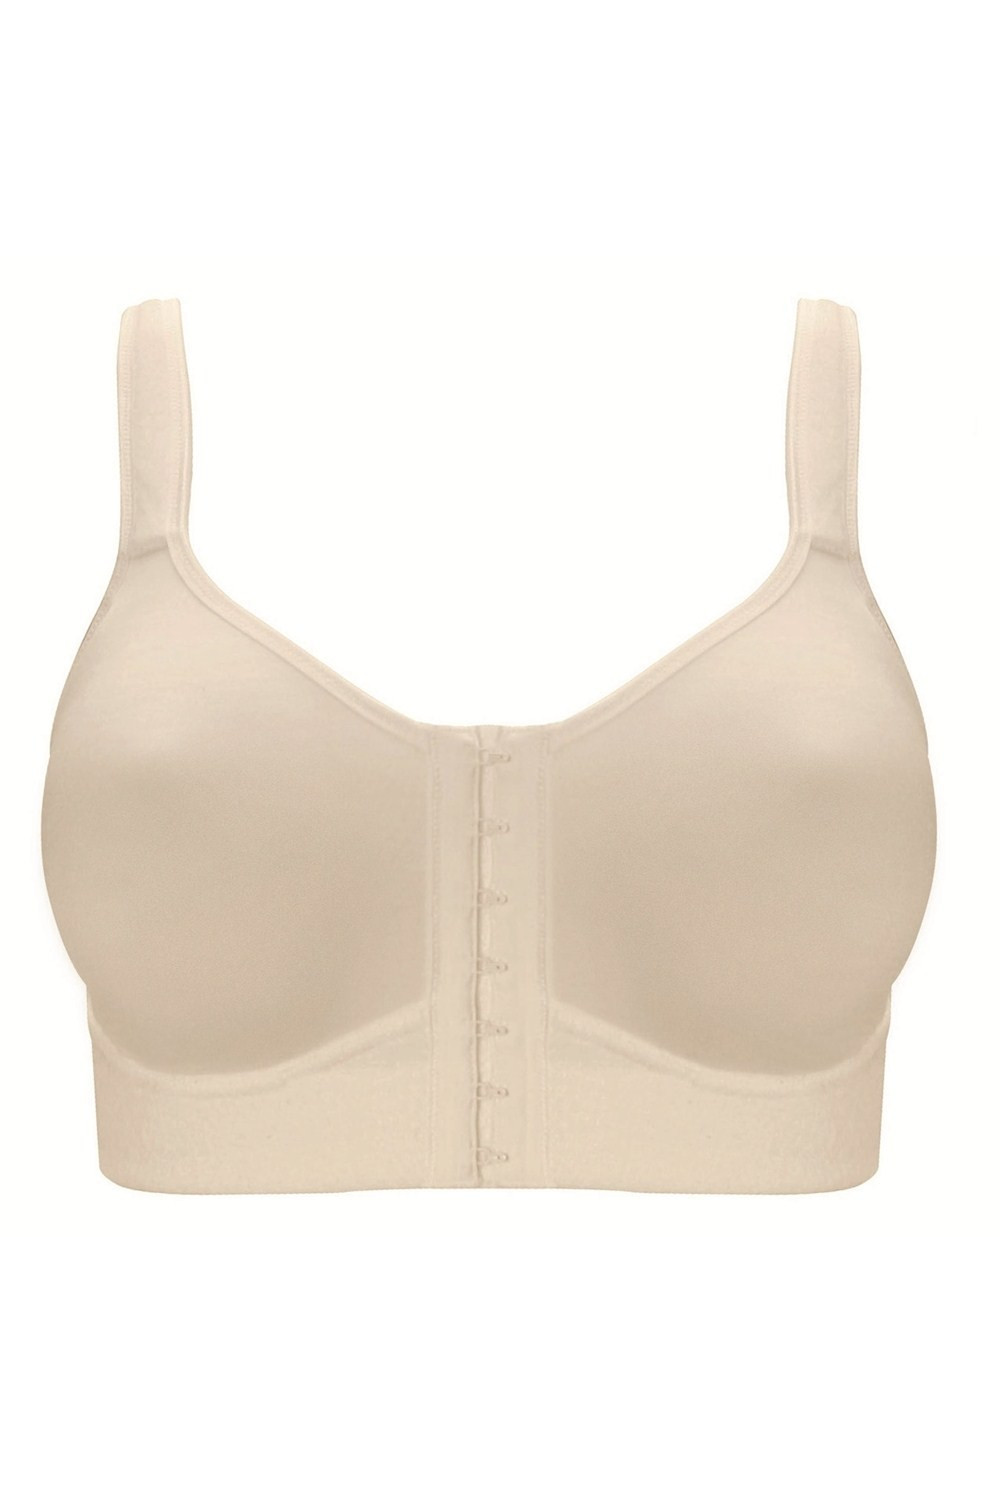 Buy Post Surgical Bra Front Closure Post Surgery Bra Post Op Front Close  Bras Sports Bra Mastectomy Bra Wirefree for Women Online at  desertcartSeychelles